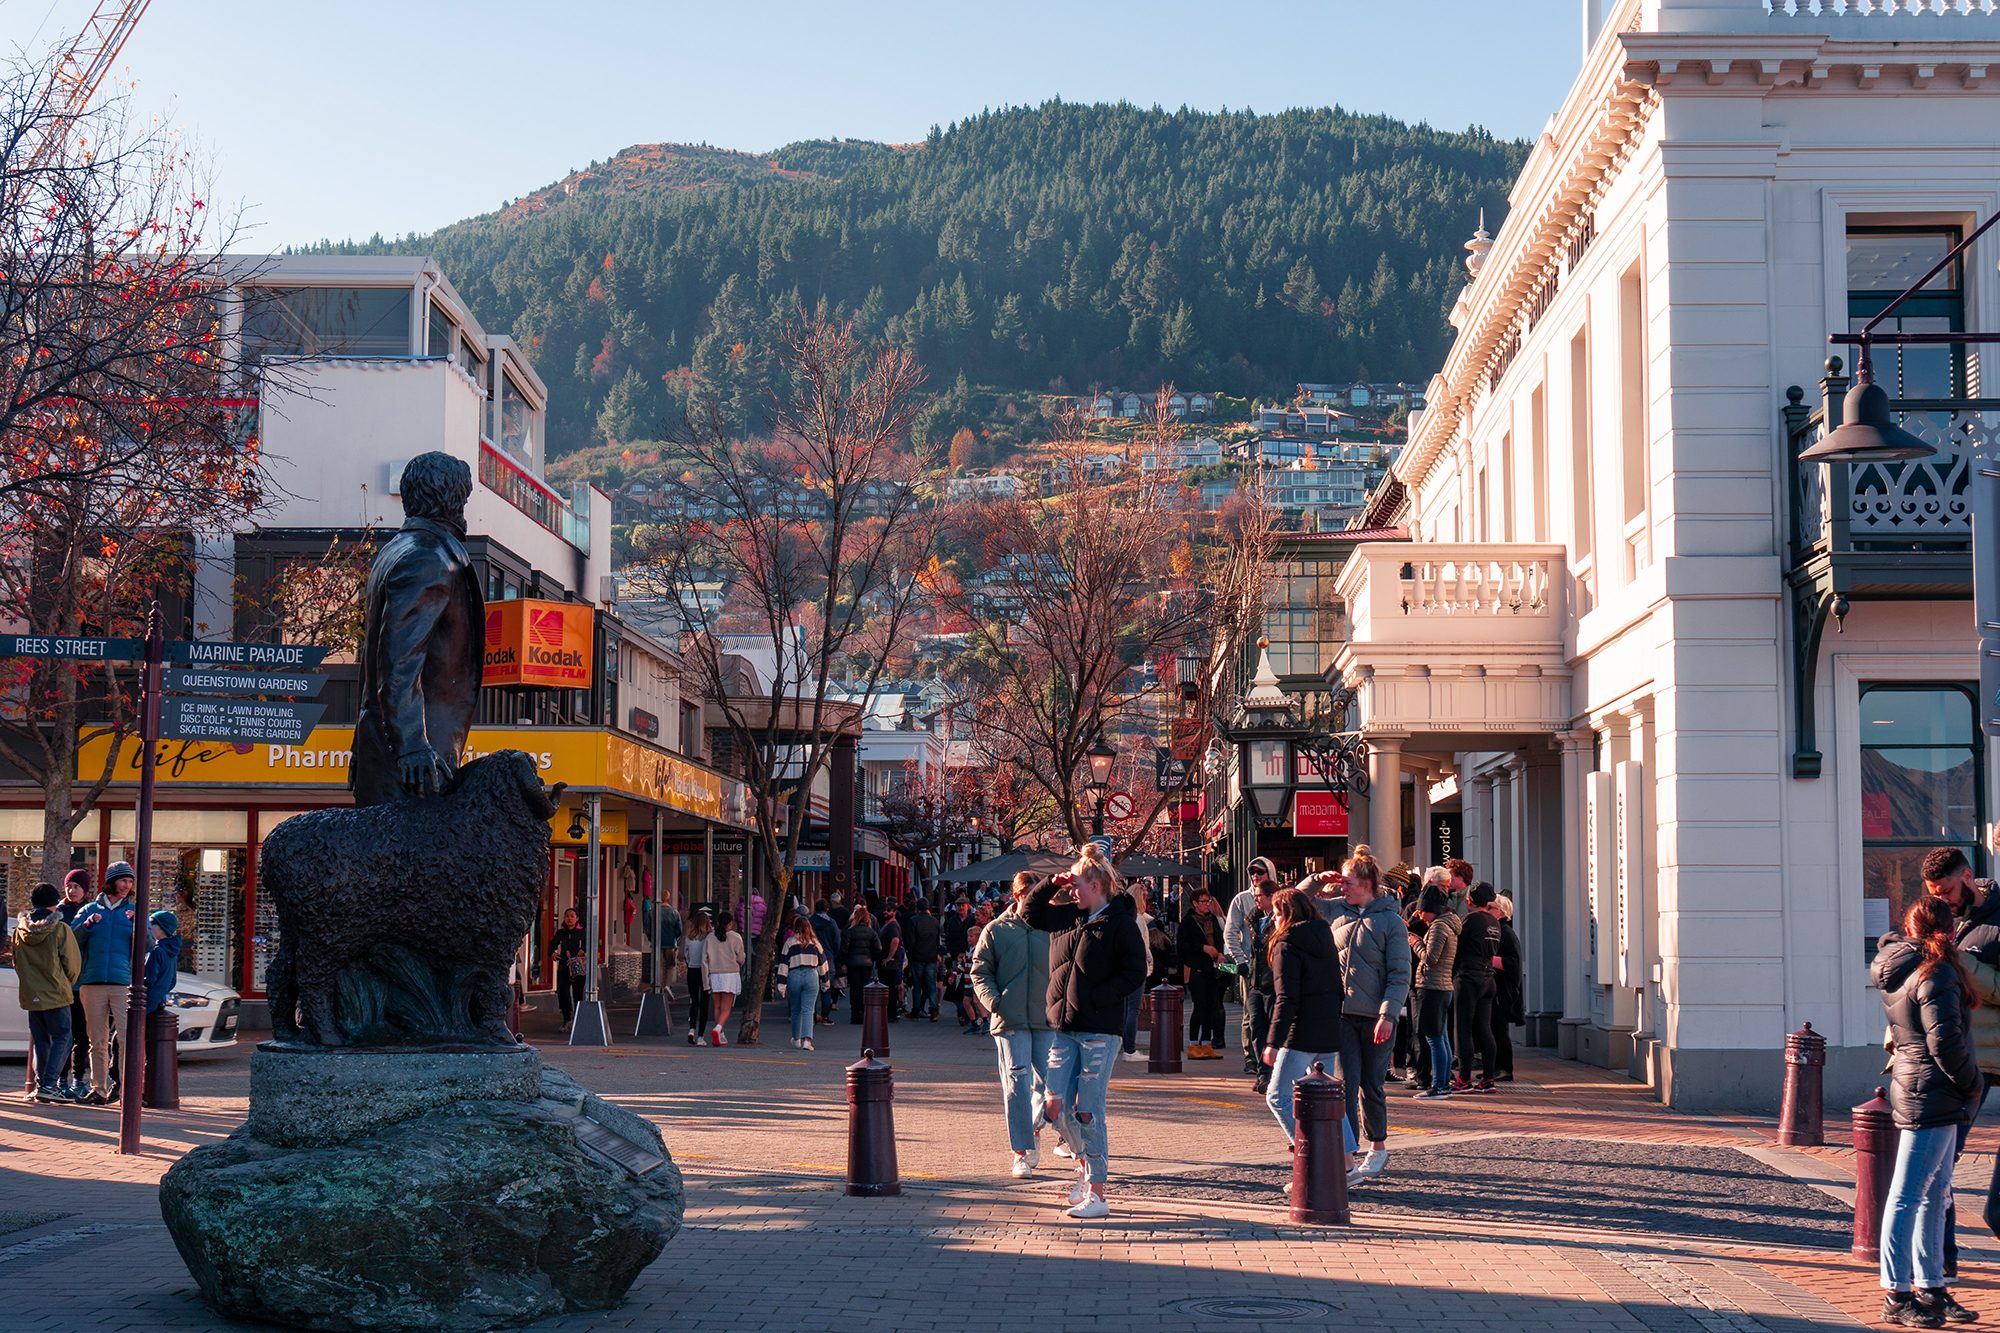 Crowded pedestrianised street with statue in front